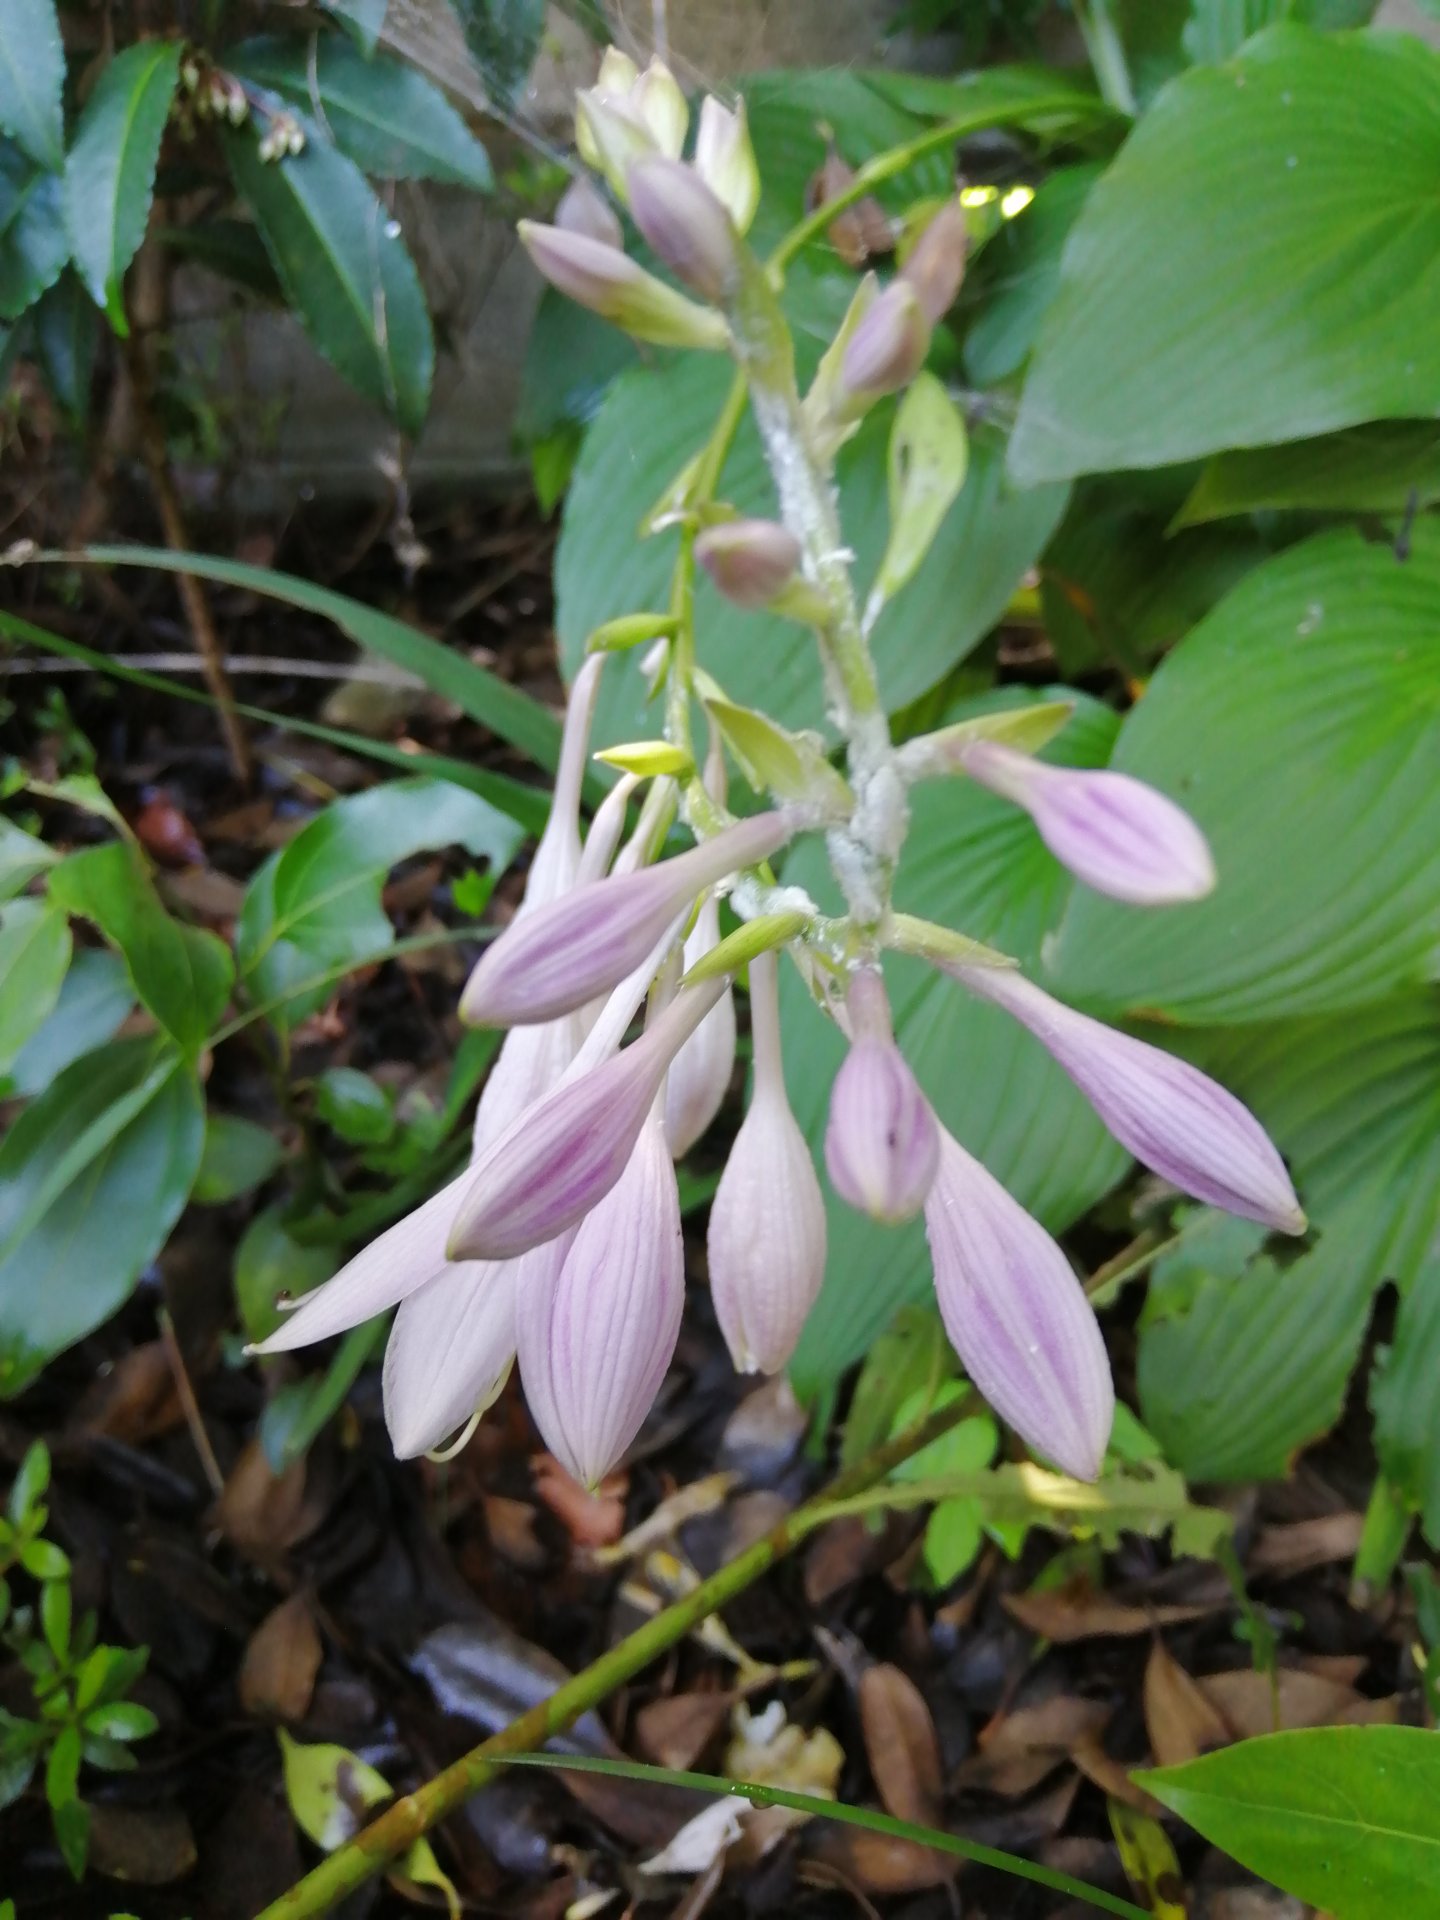 My hostas are blooming for the first time!